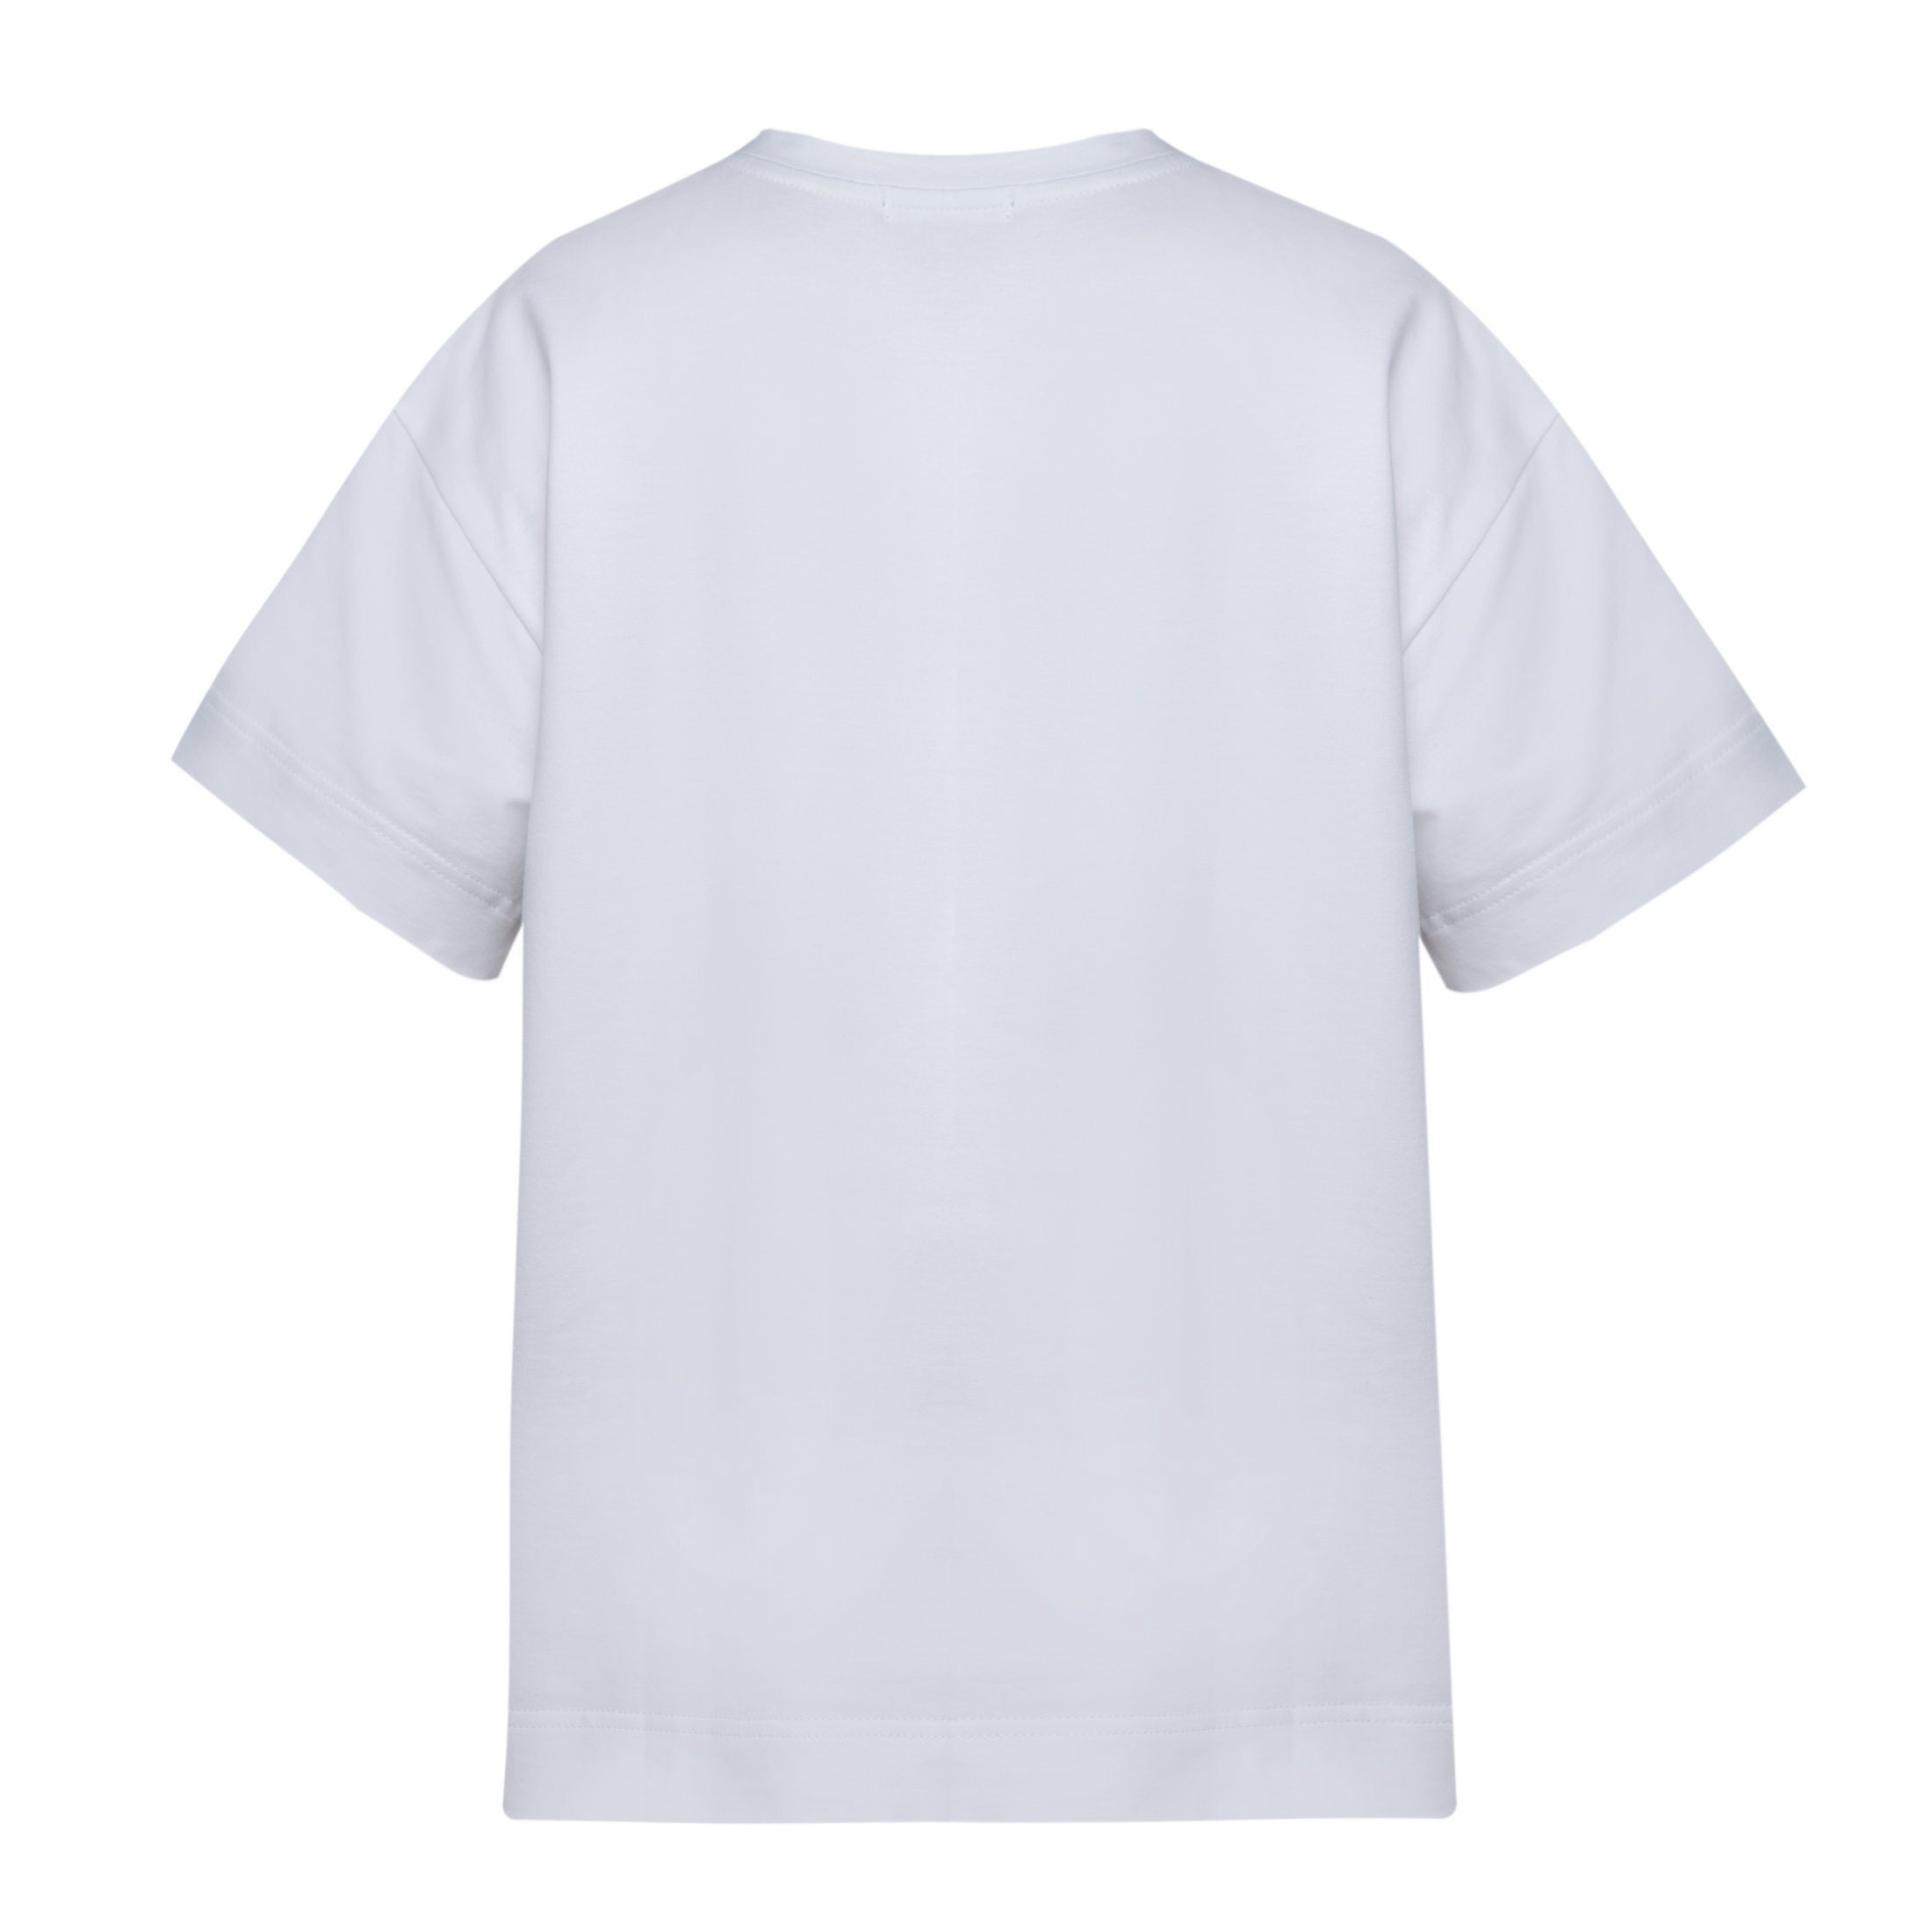 Women's straight white t-shirt with a large black lettering